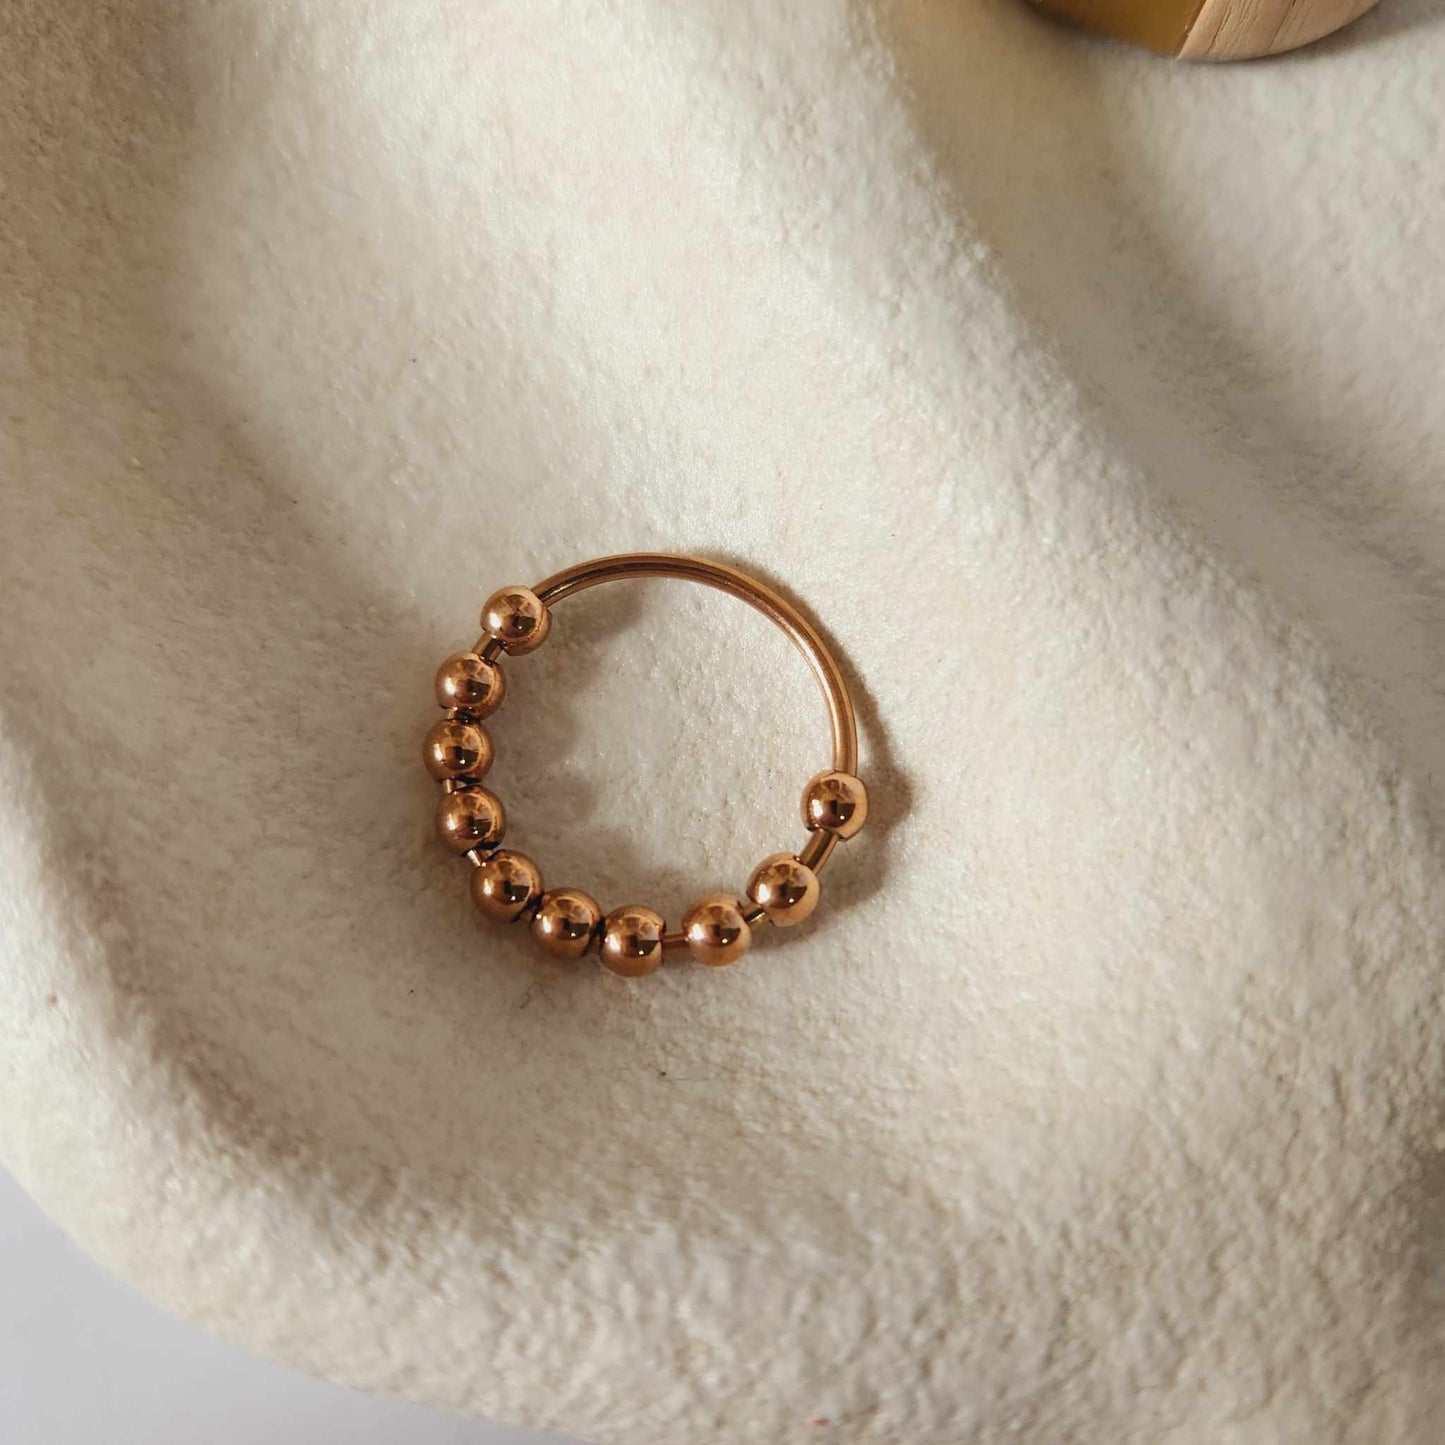 10 Beaded Ring - Rose Gold Fidget Anxiety Ring